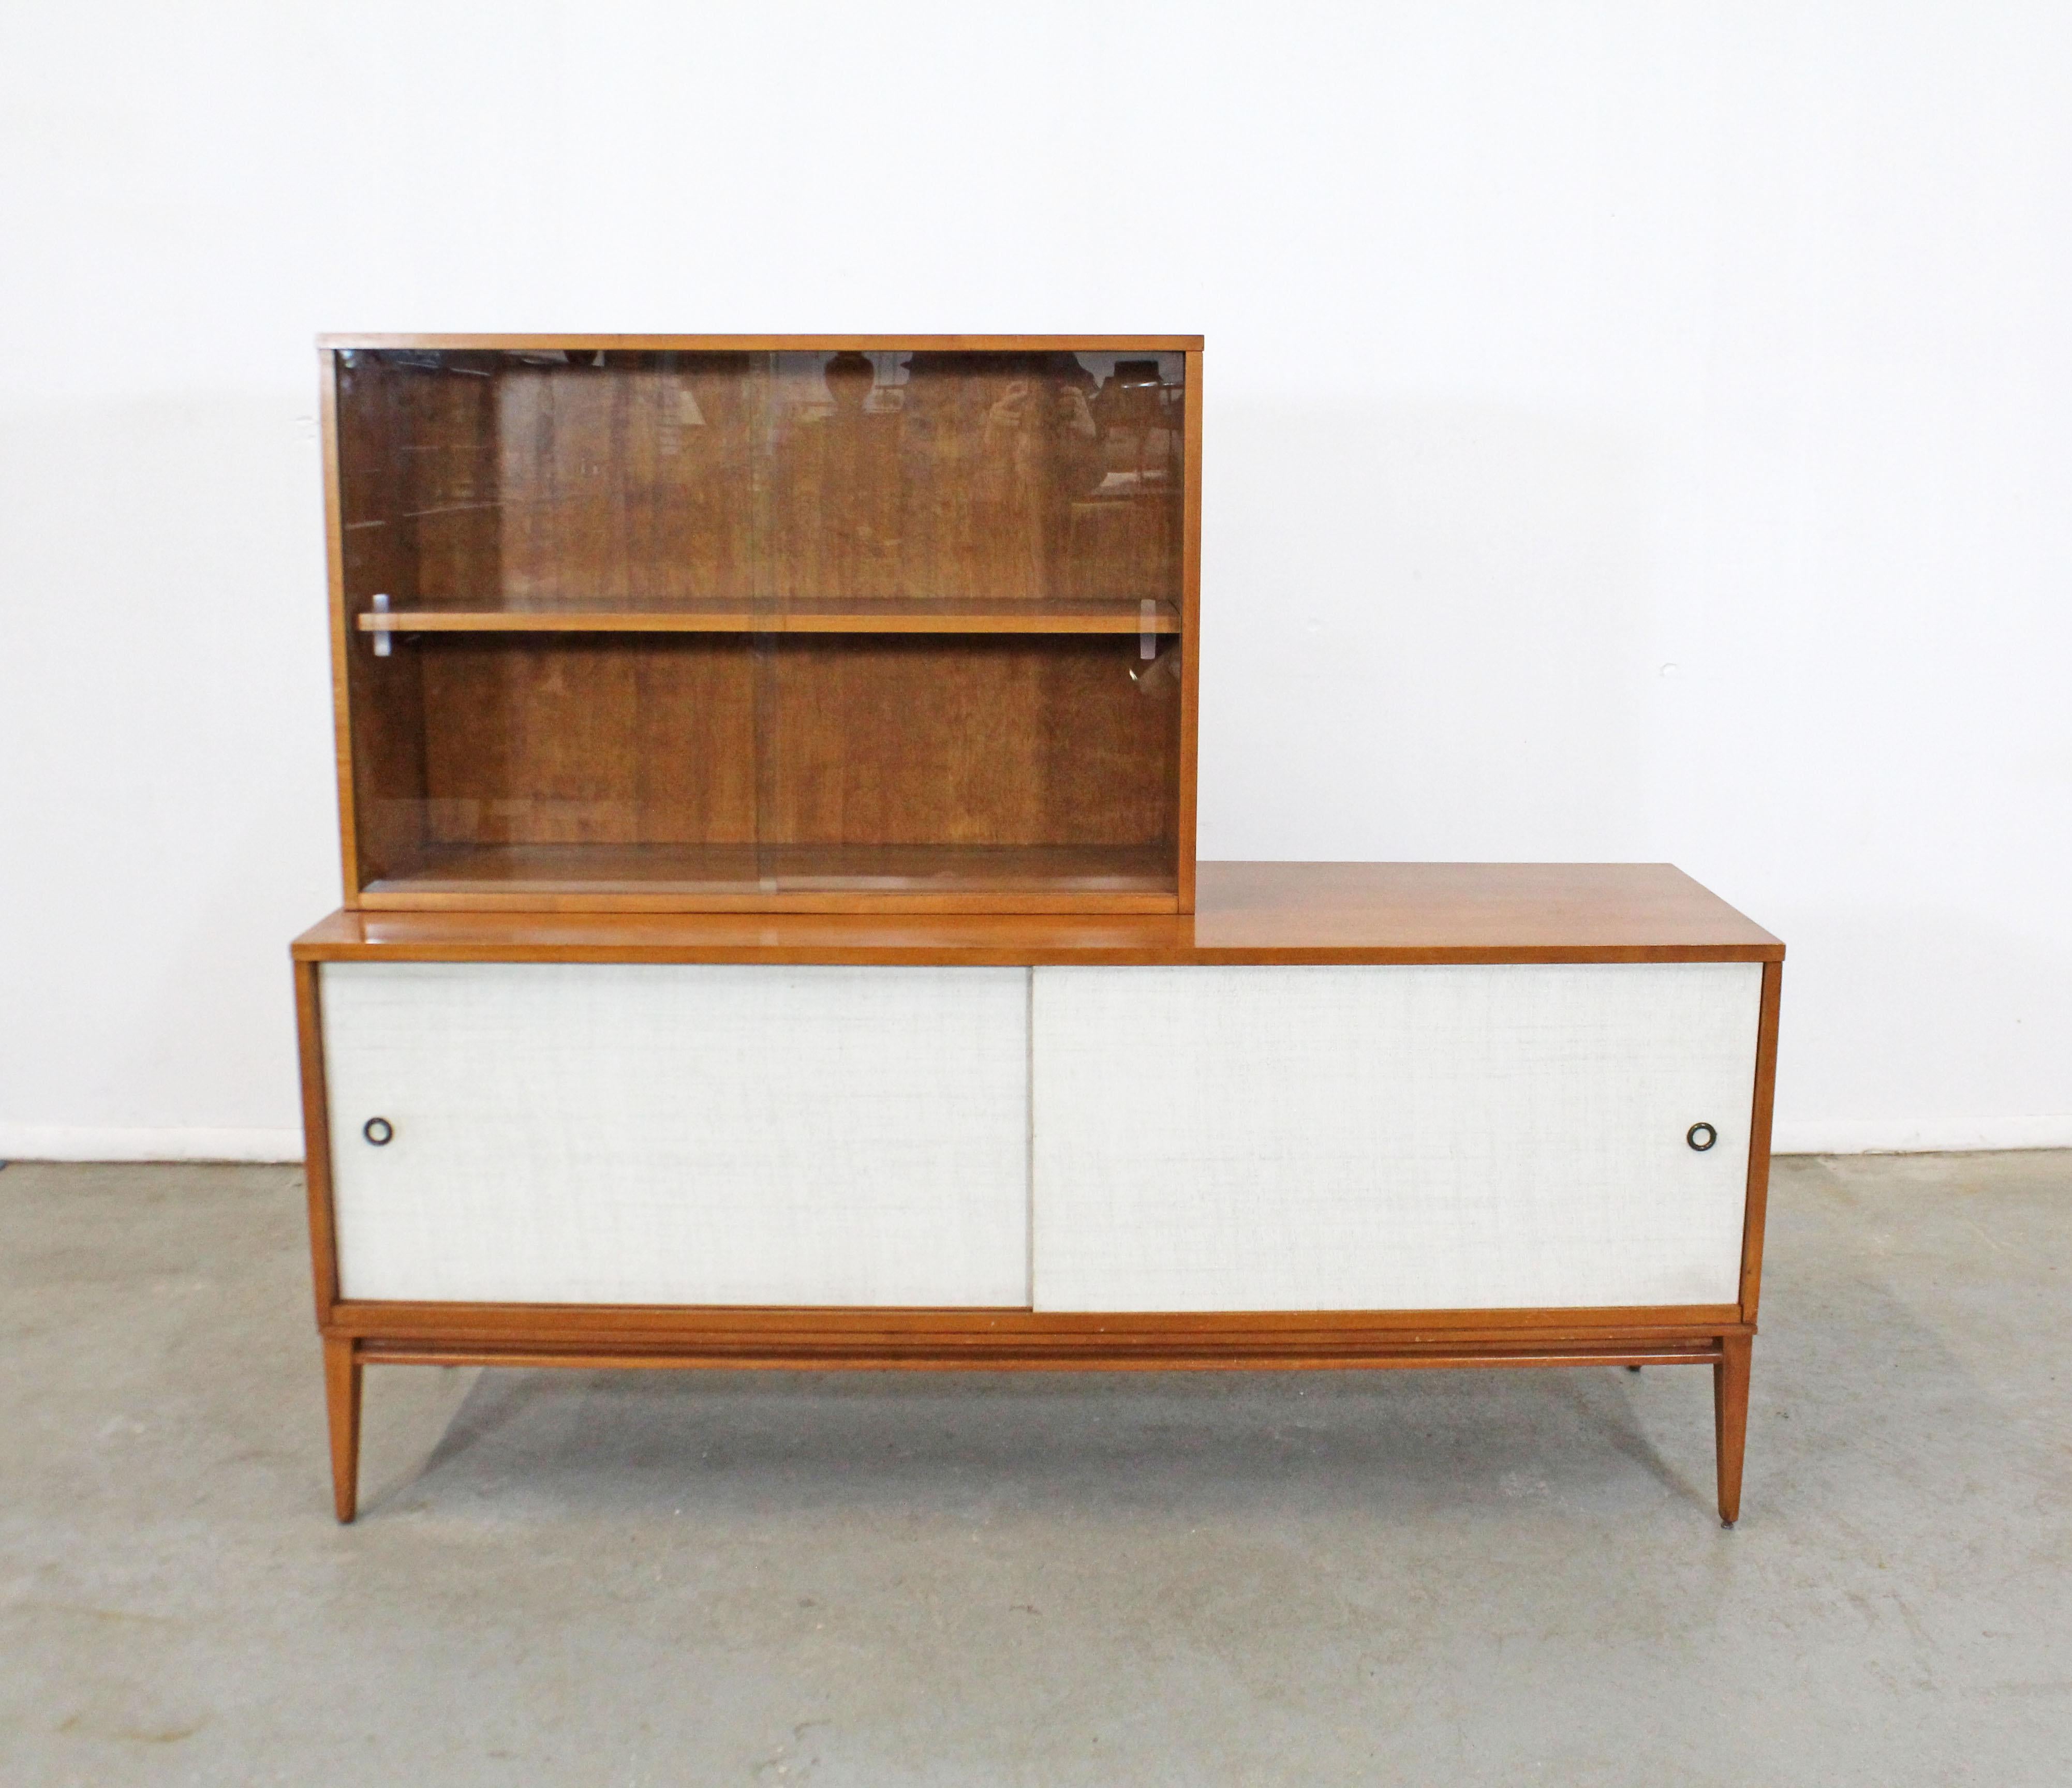 Offered is a vintage two-piece credenza designed by Paul McCobb for Planner Group. Features sliding glass doors and adjustable shelving on top, and sliding vinyl doors with shelving on bottom. It is in good condition considering its age, shows